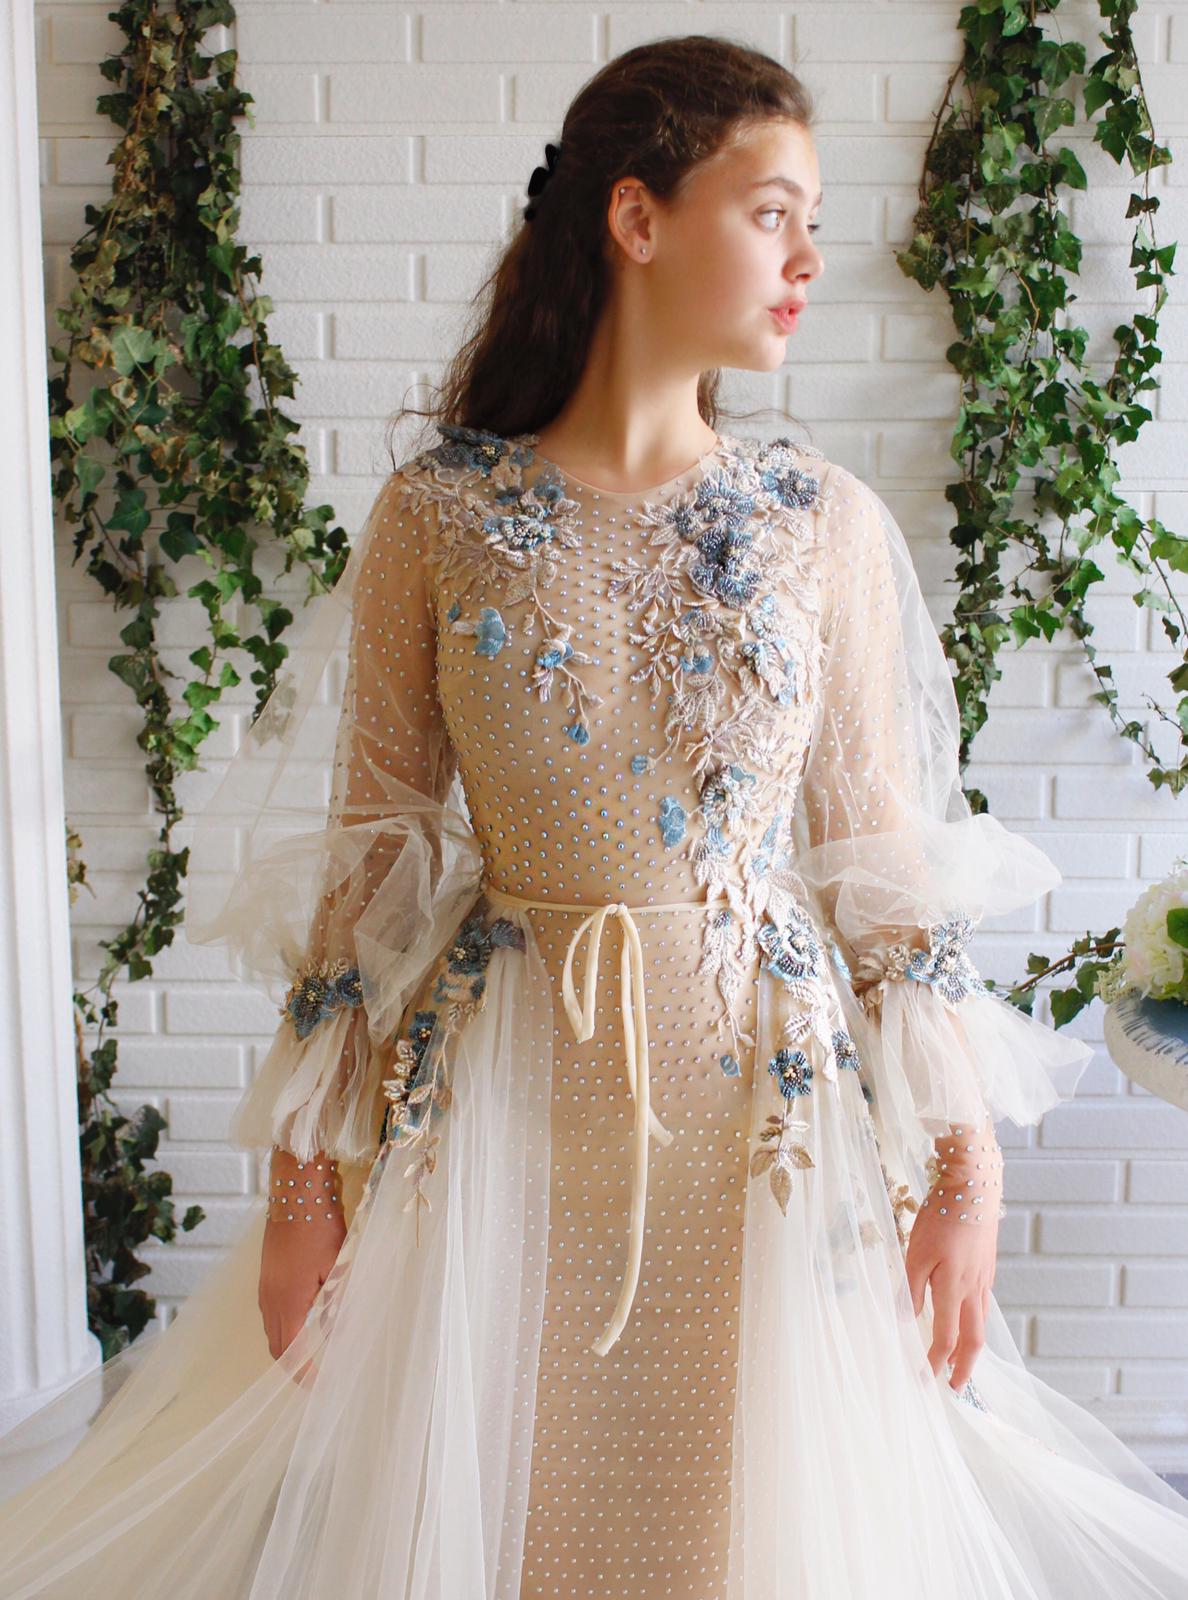 Beige overskirt dress with long sleeves and embroidery